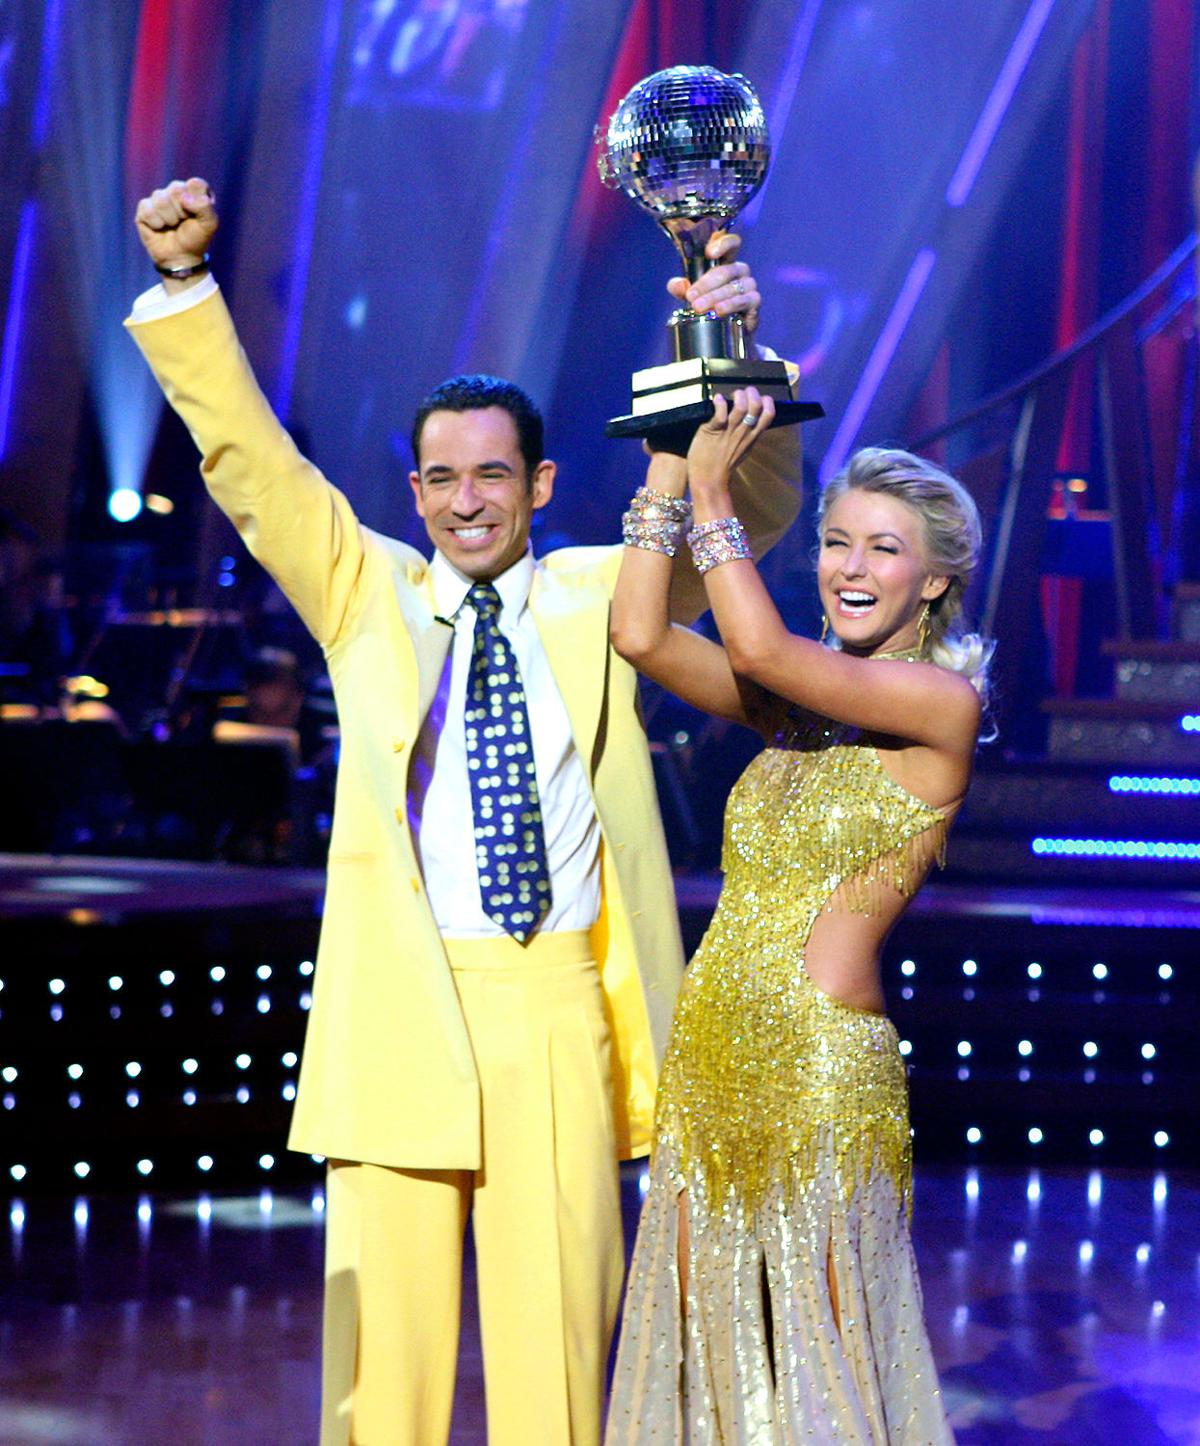 List 90+ Images was helio castroneves on dancing with the stars Full HD, 2k, 4k